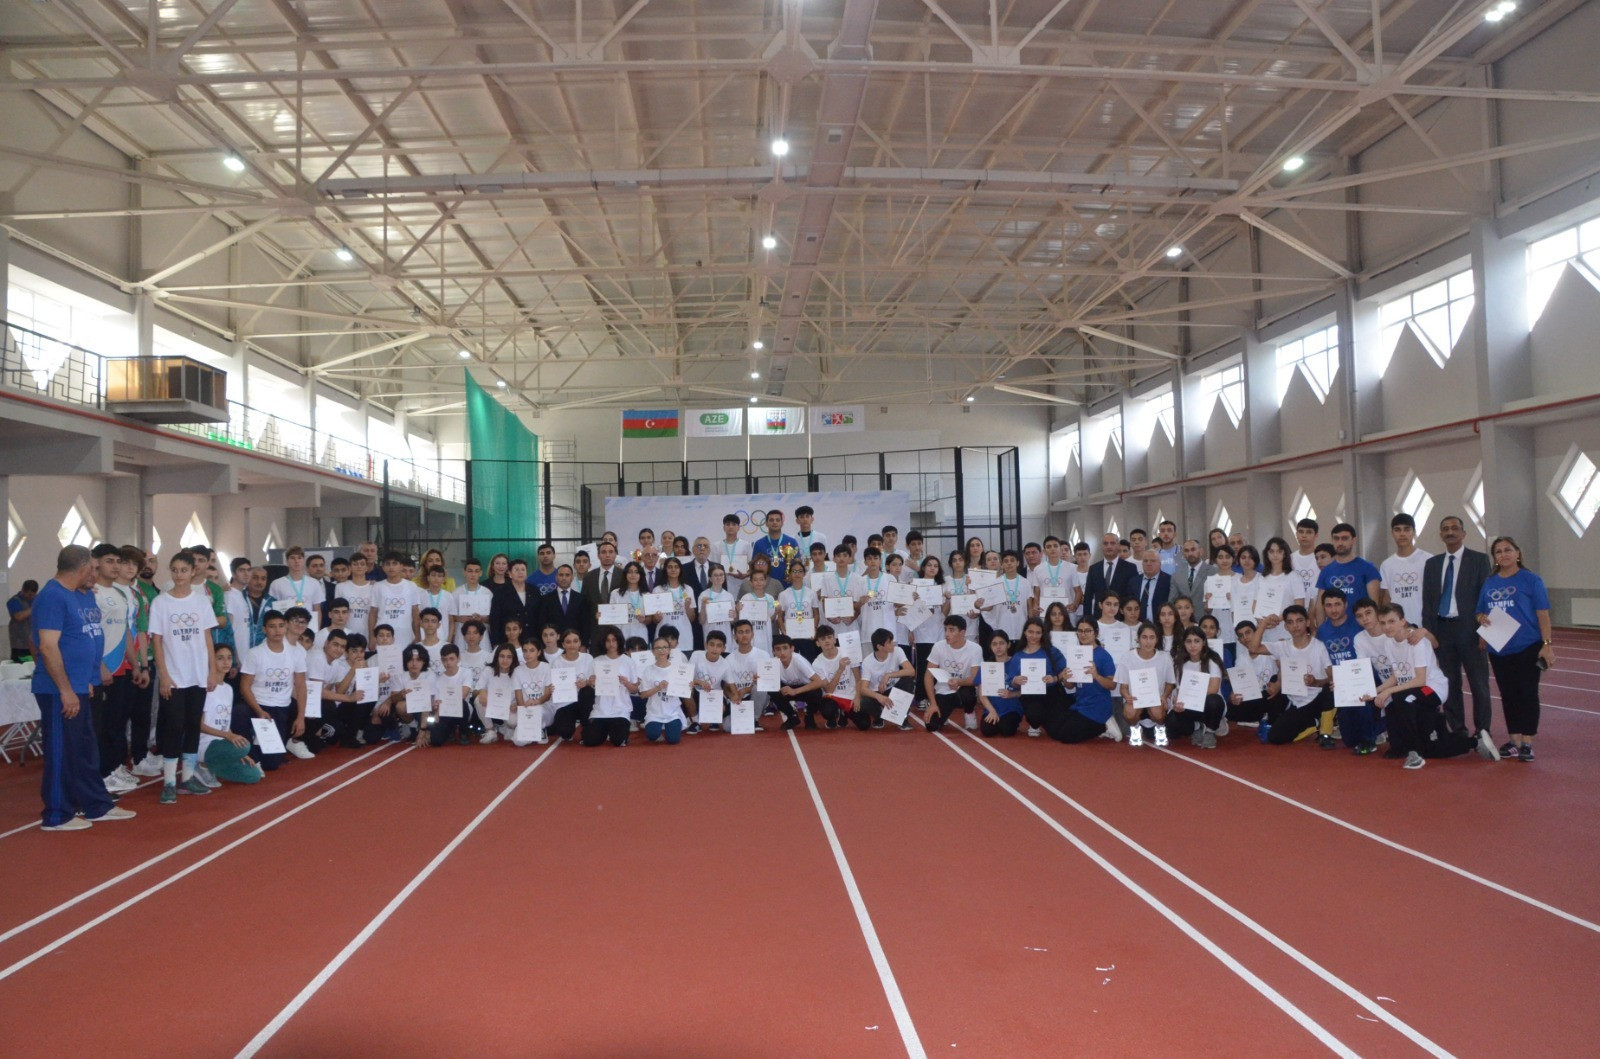 Schoolchildren take part in sports competitions as Azerbaijan NOC holds Olympic Day event